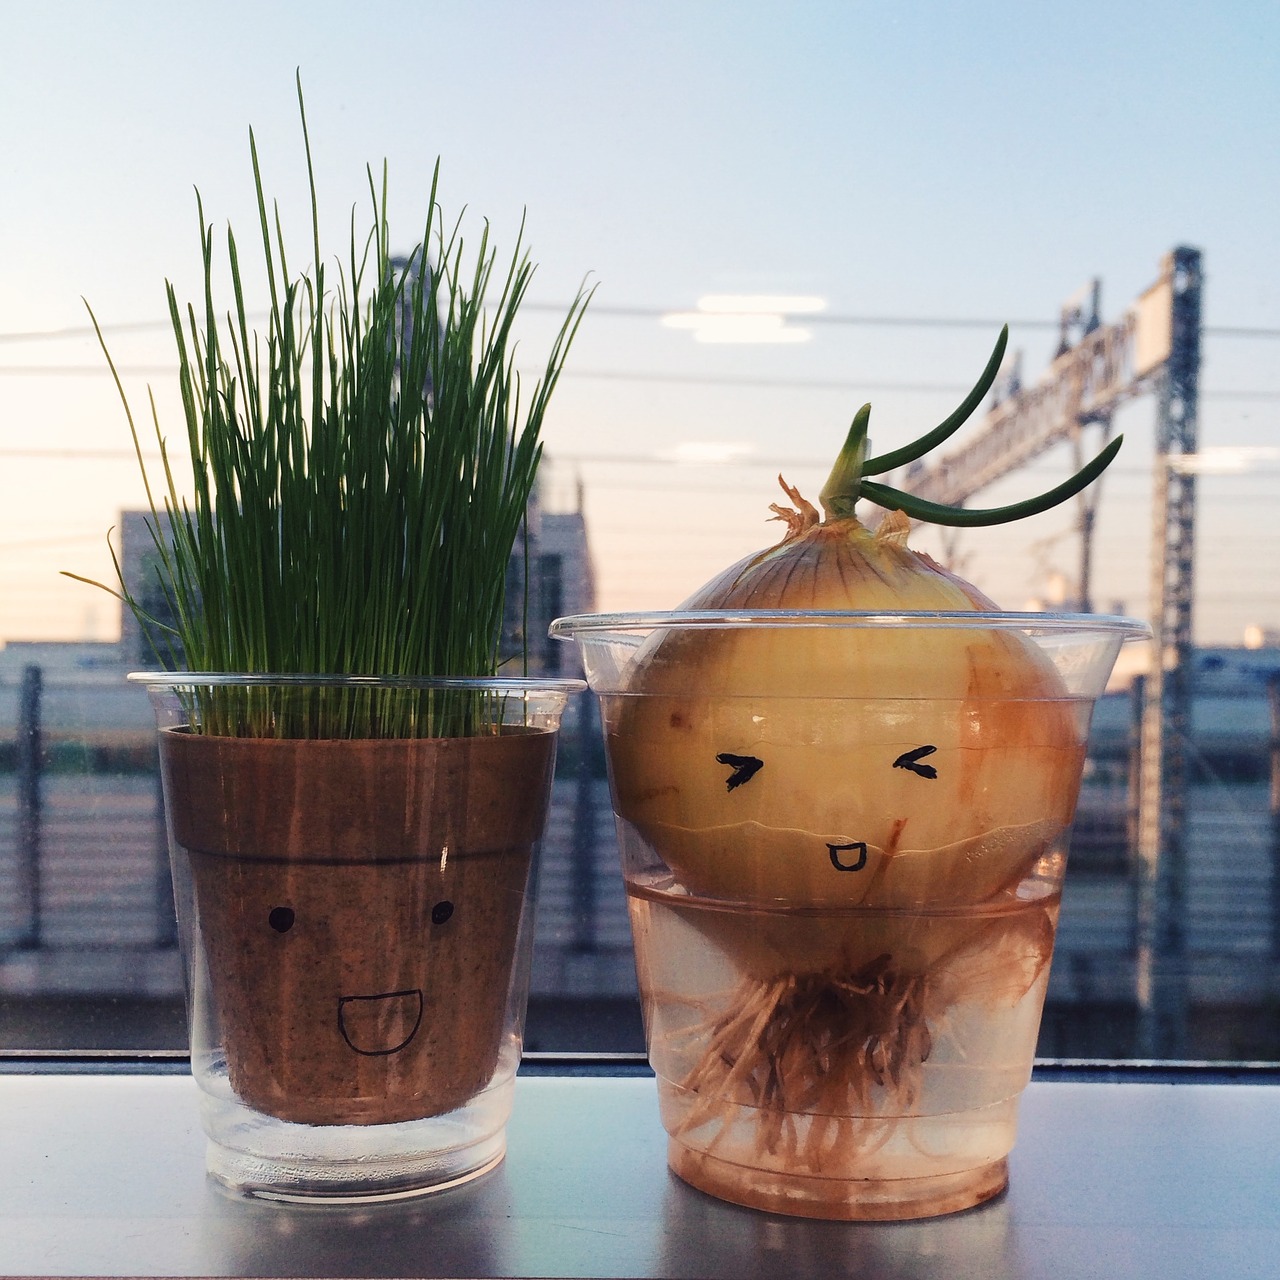 onion grass potted plant free photo